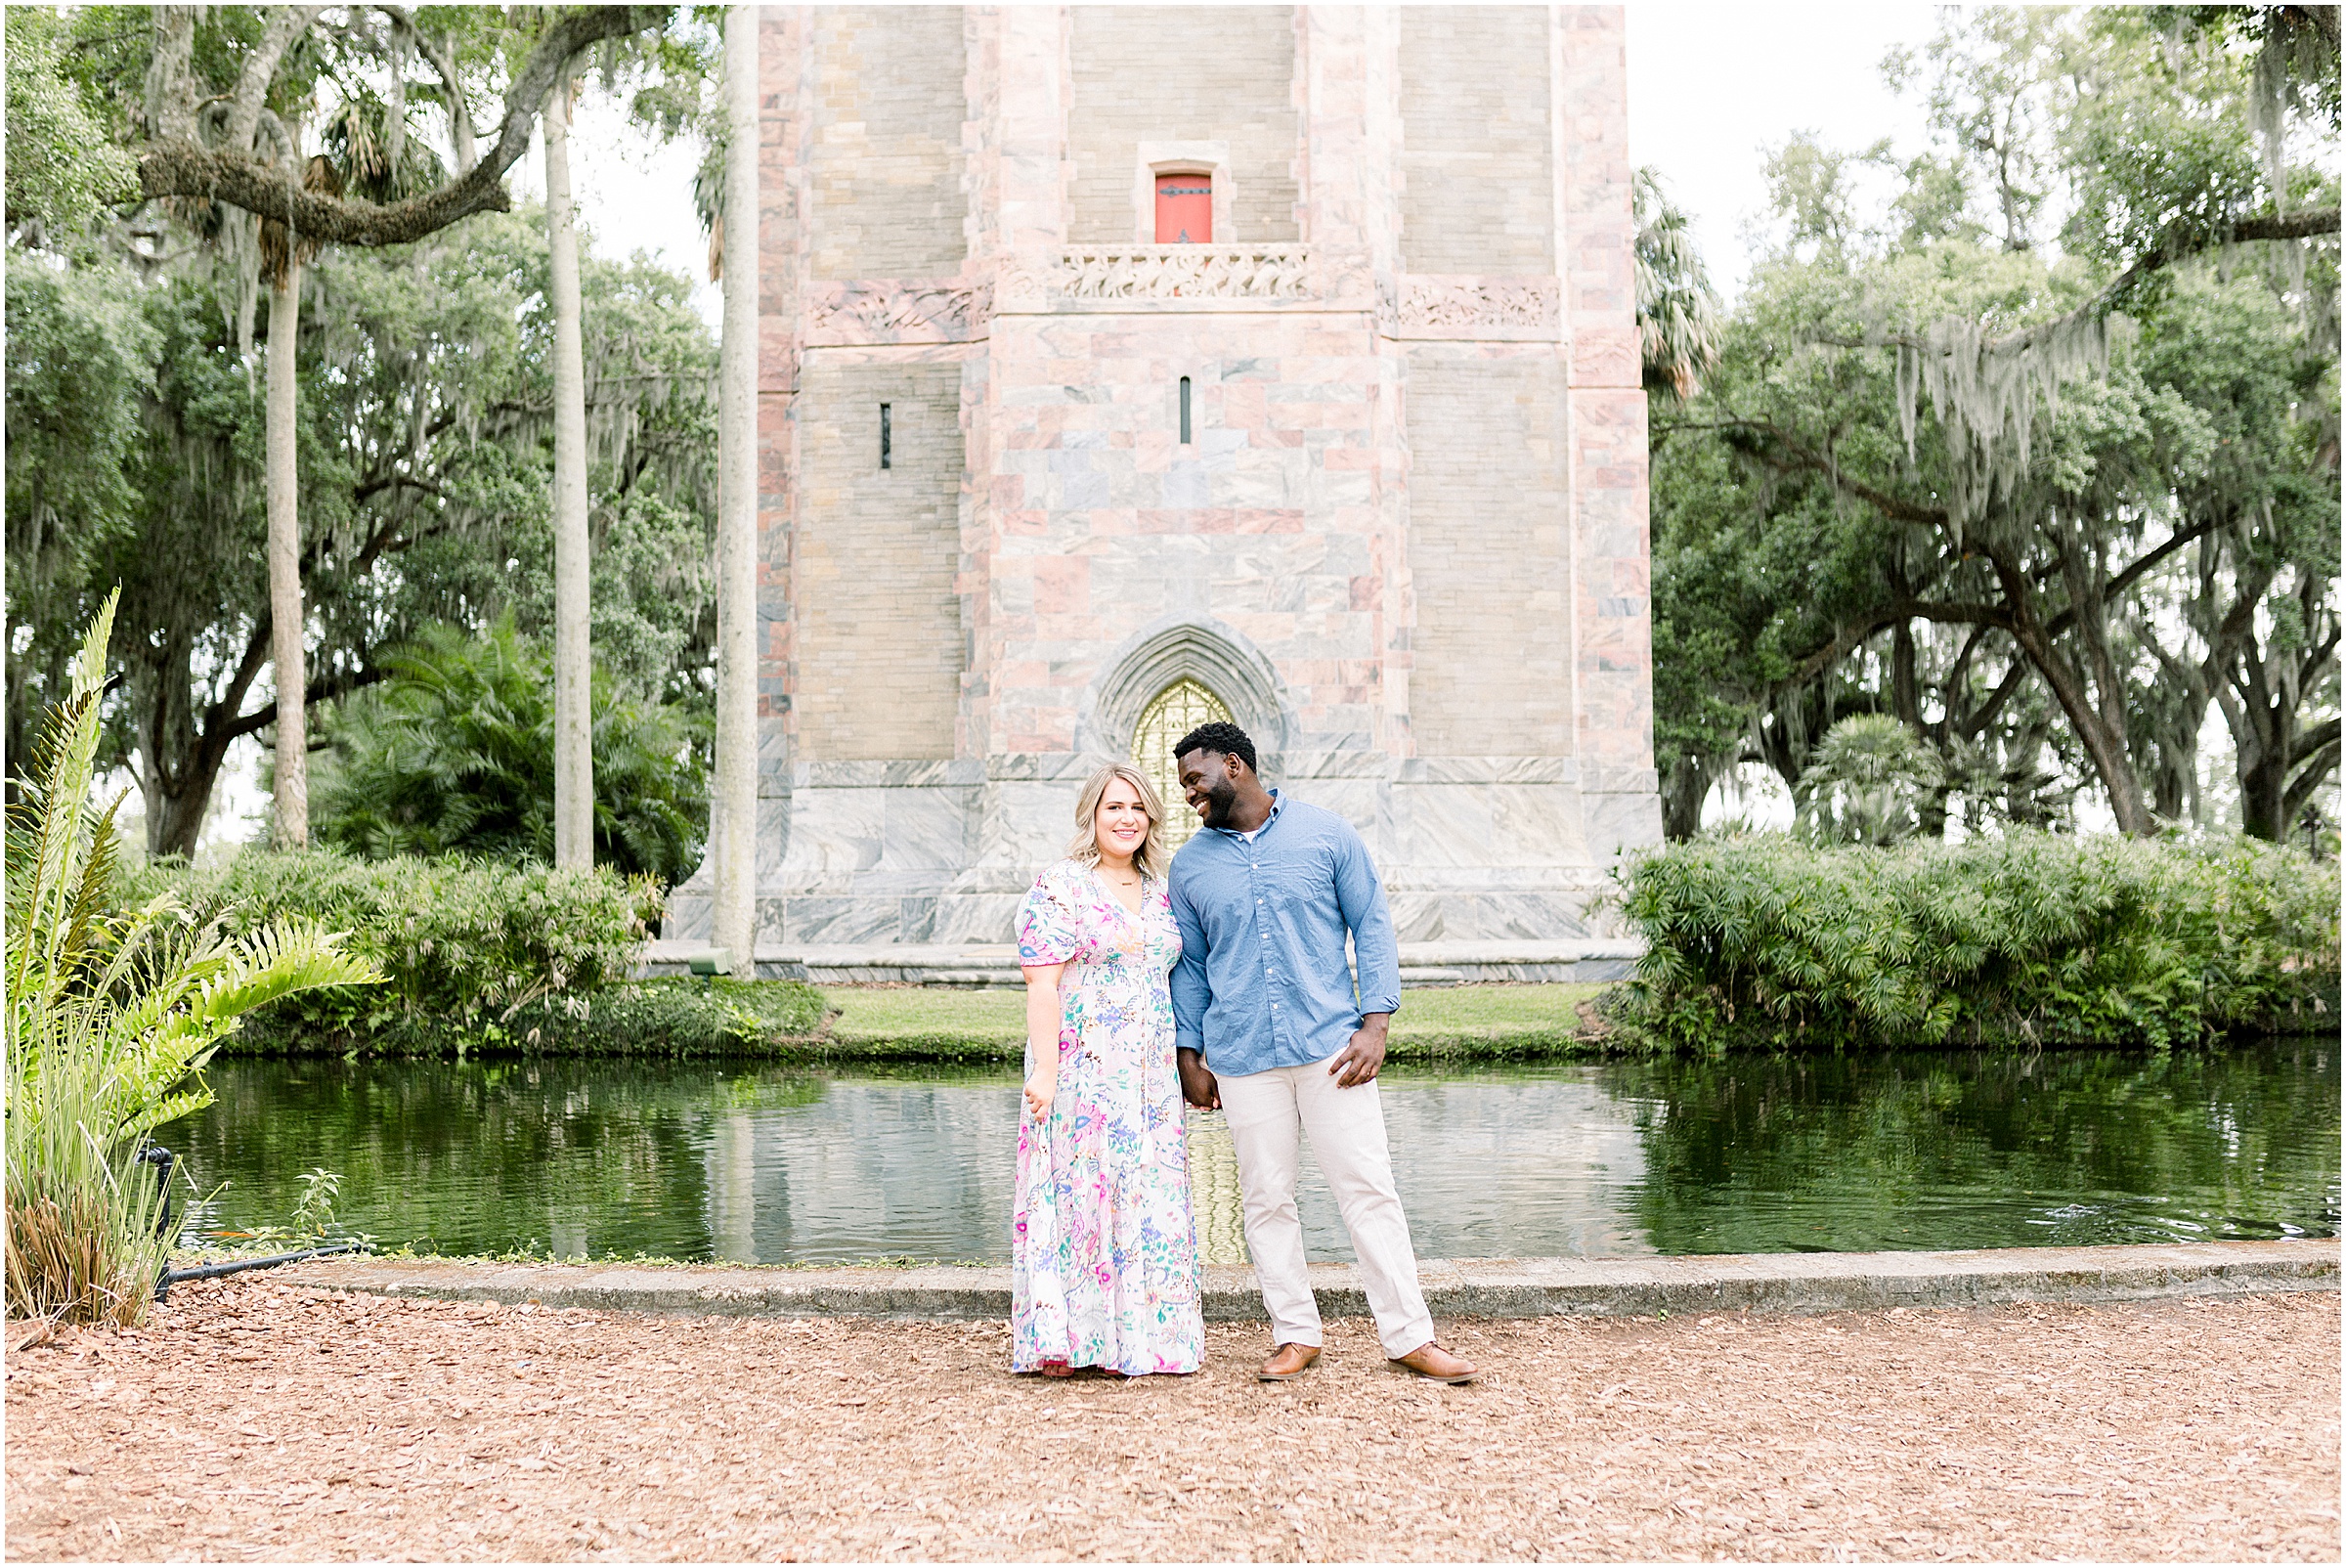 On April 13, 2019, I said yes to my boyfriend Adson at Bok Tower Gardens in Lake Wales, Florida.